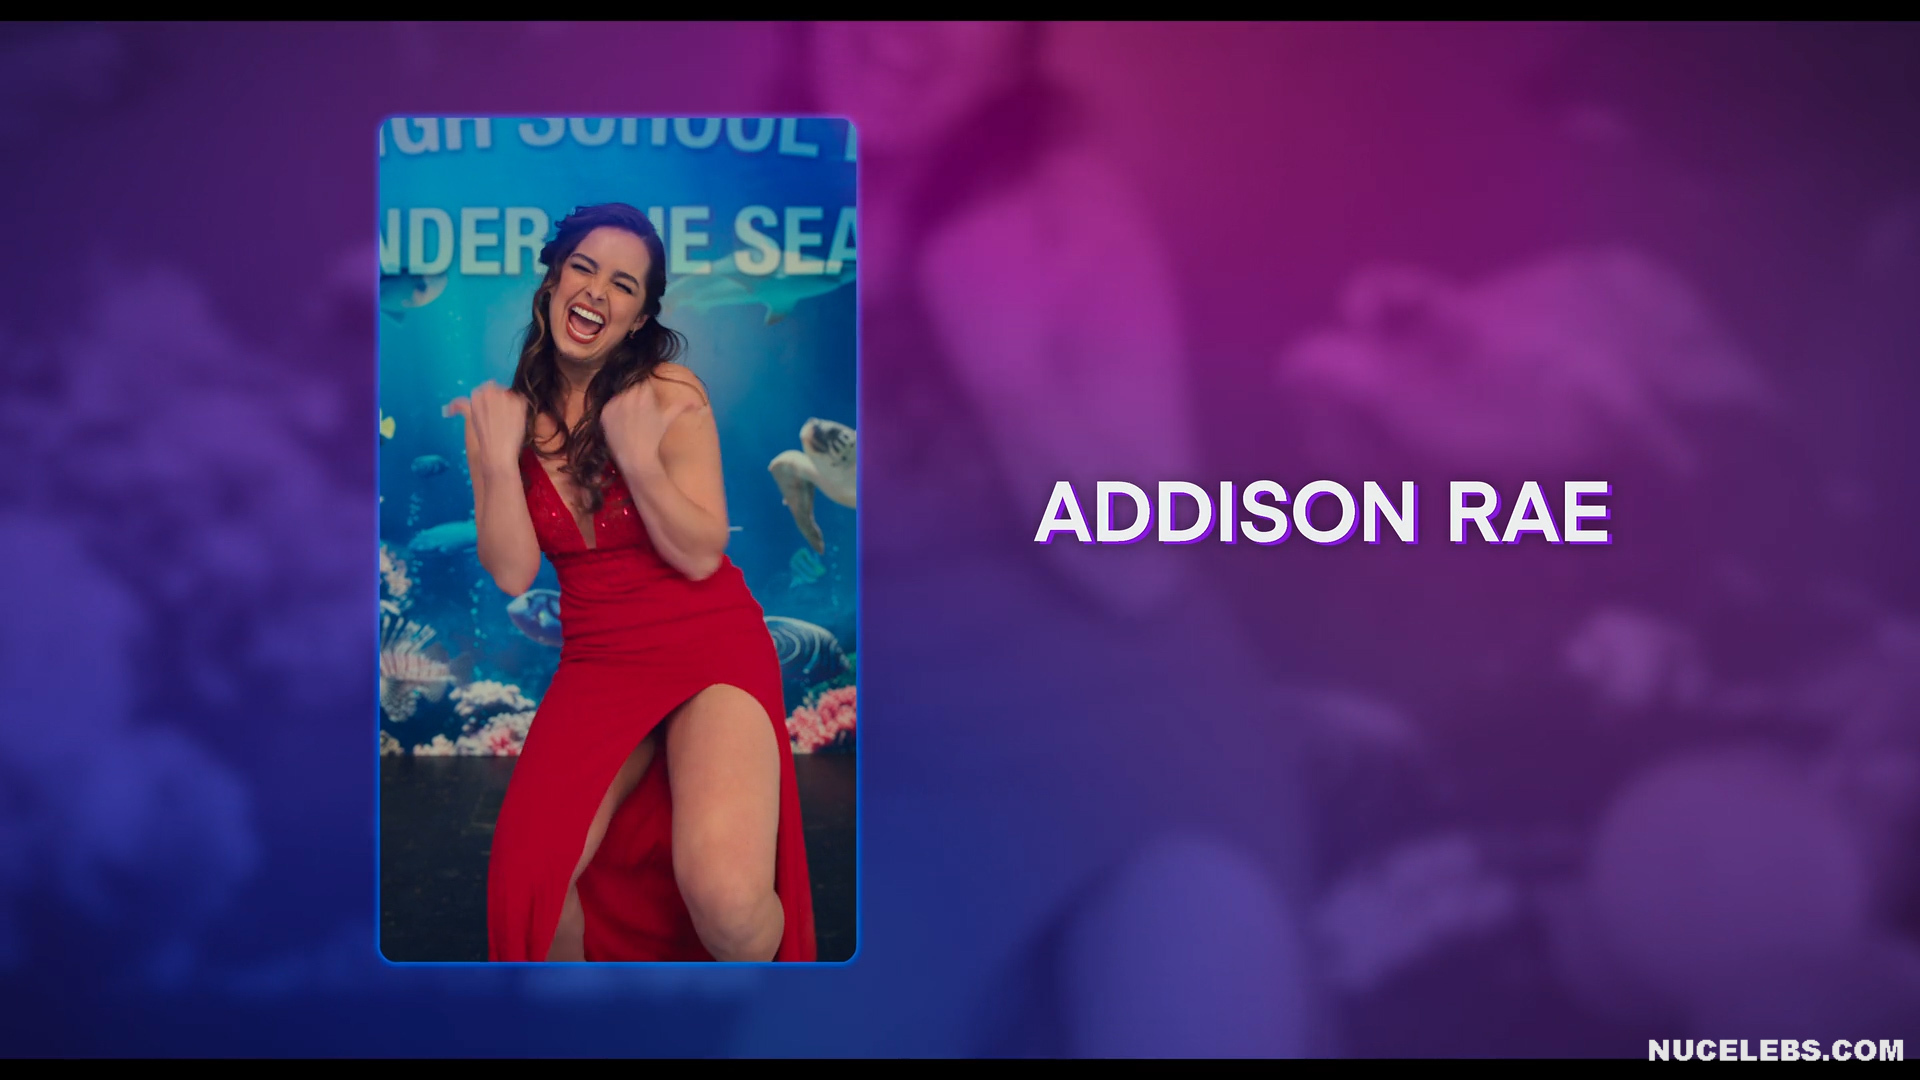 What is addison rae phone number